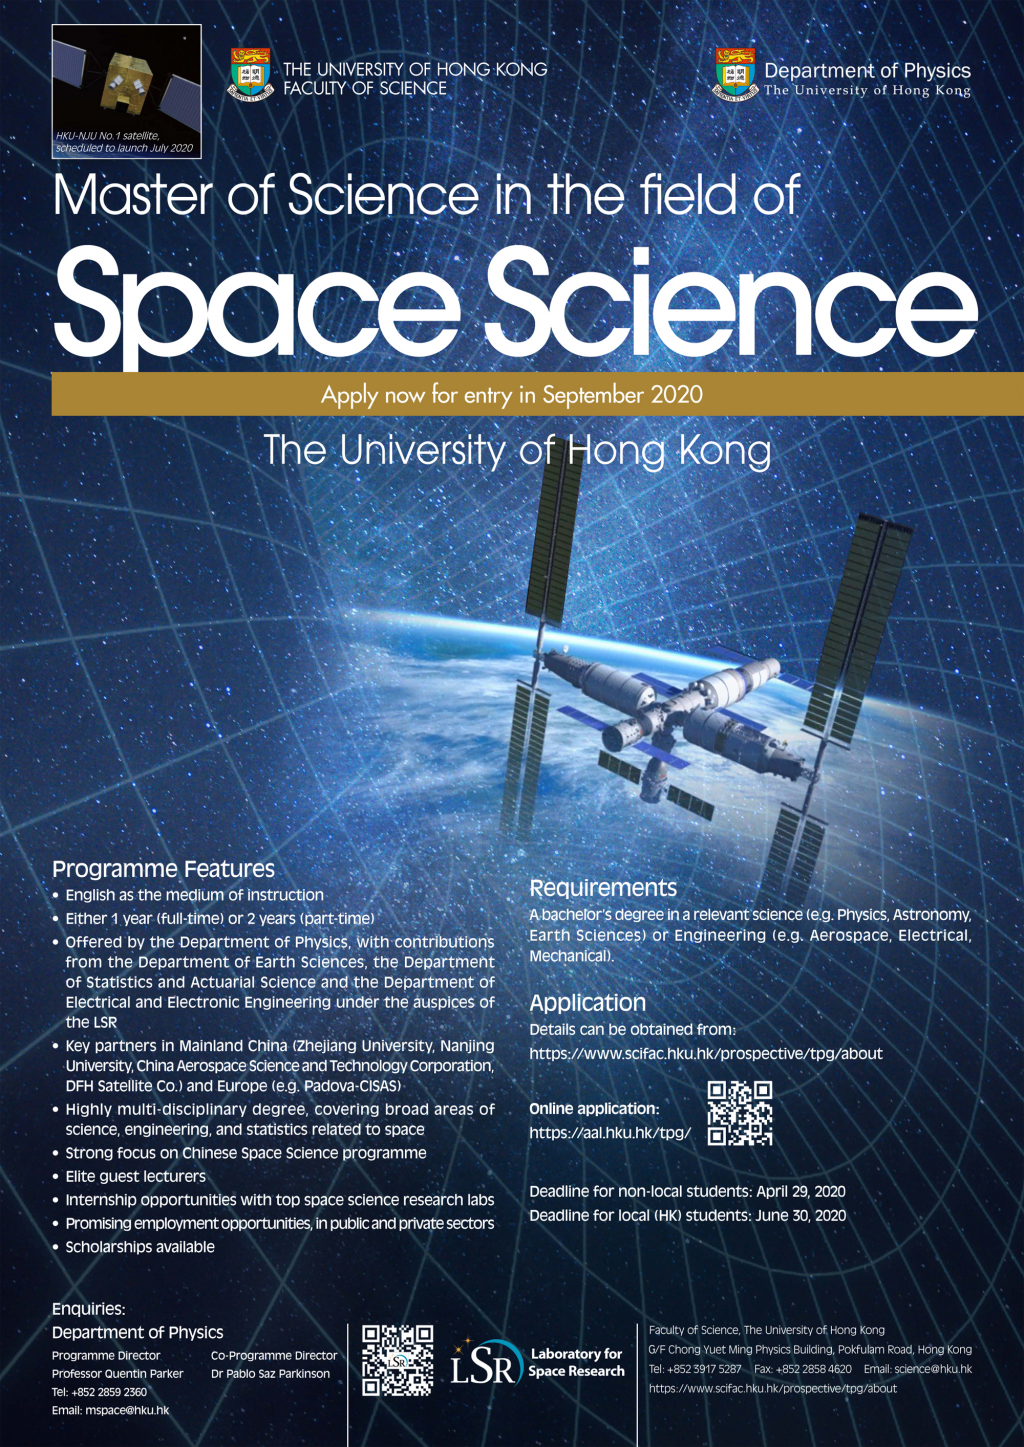 Master of Science in the field of Space Science